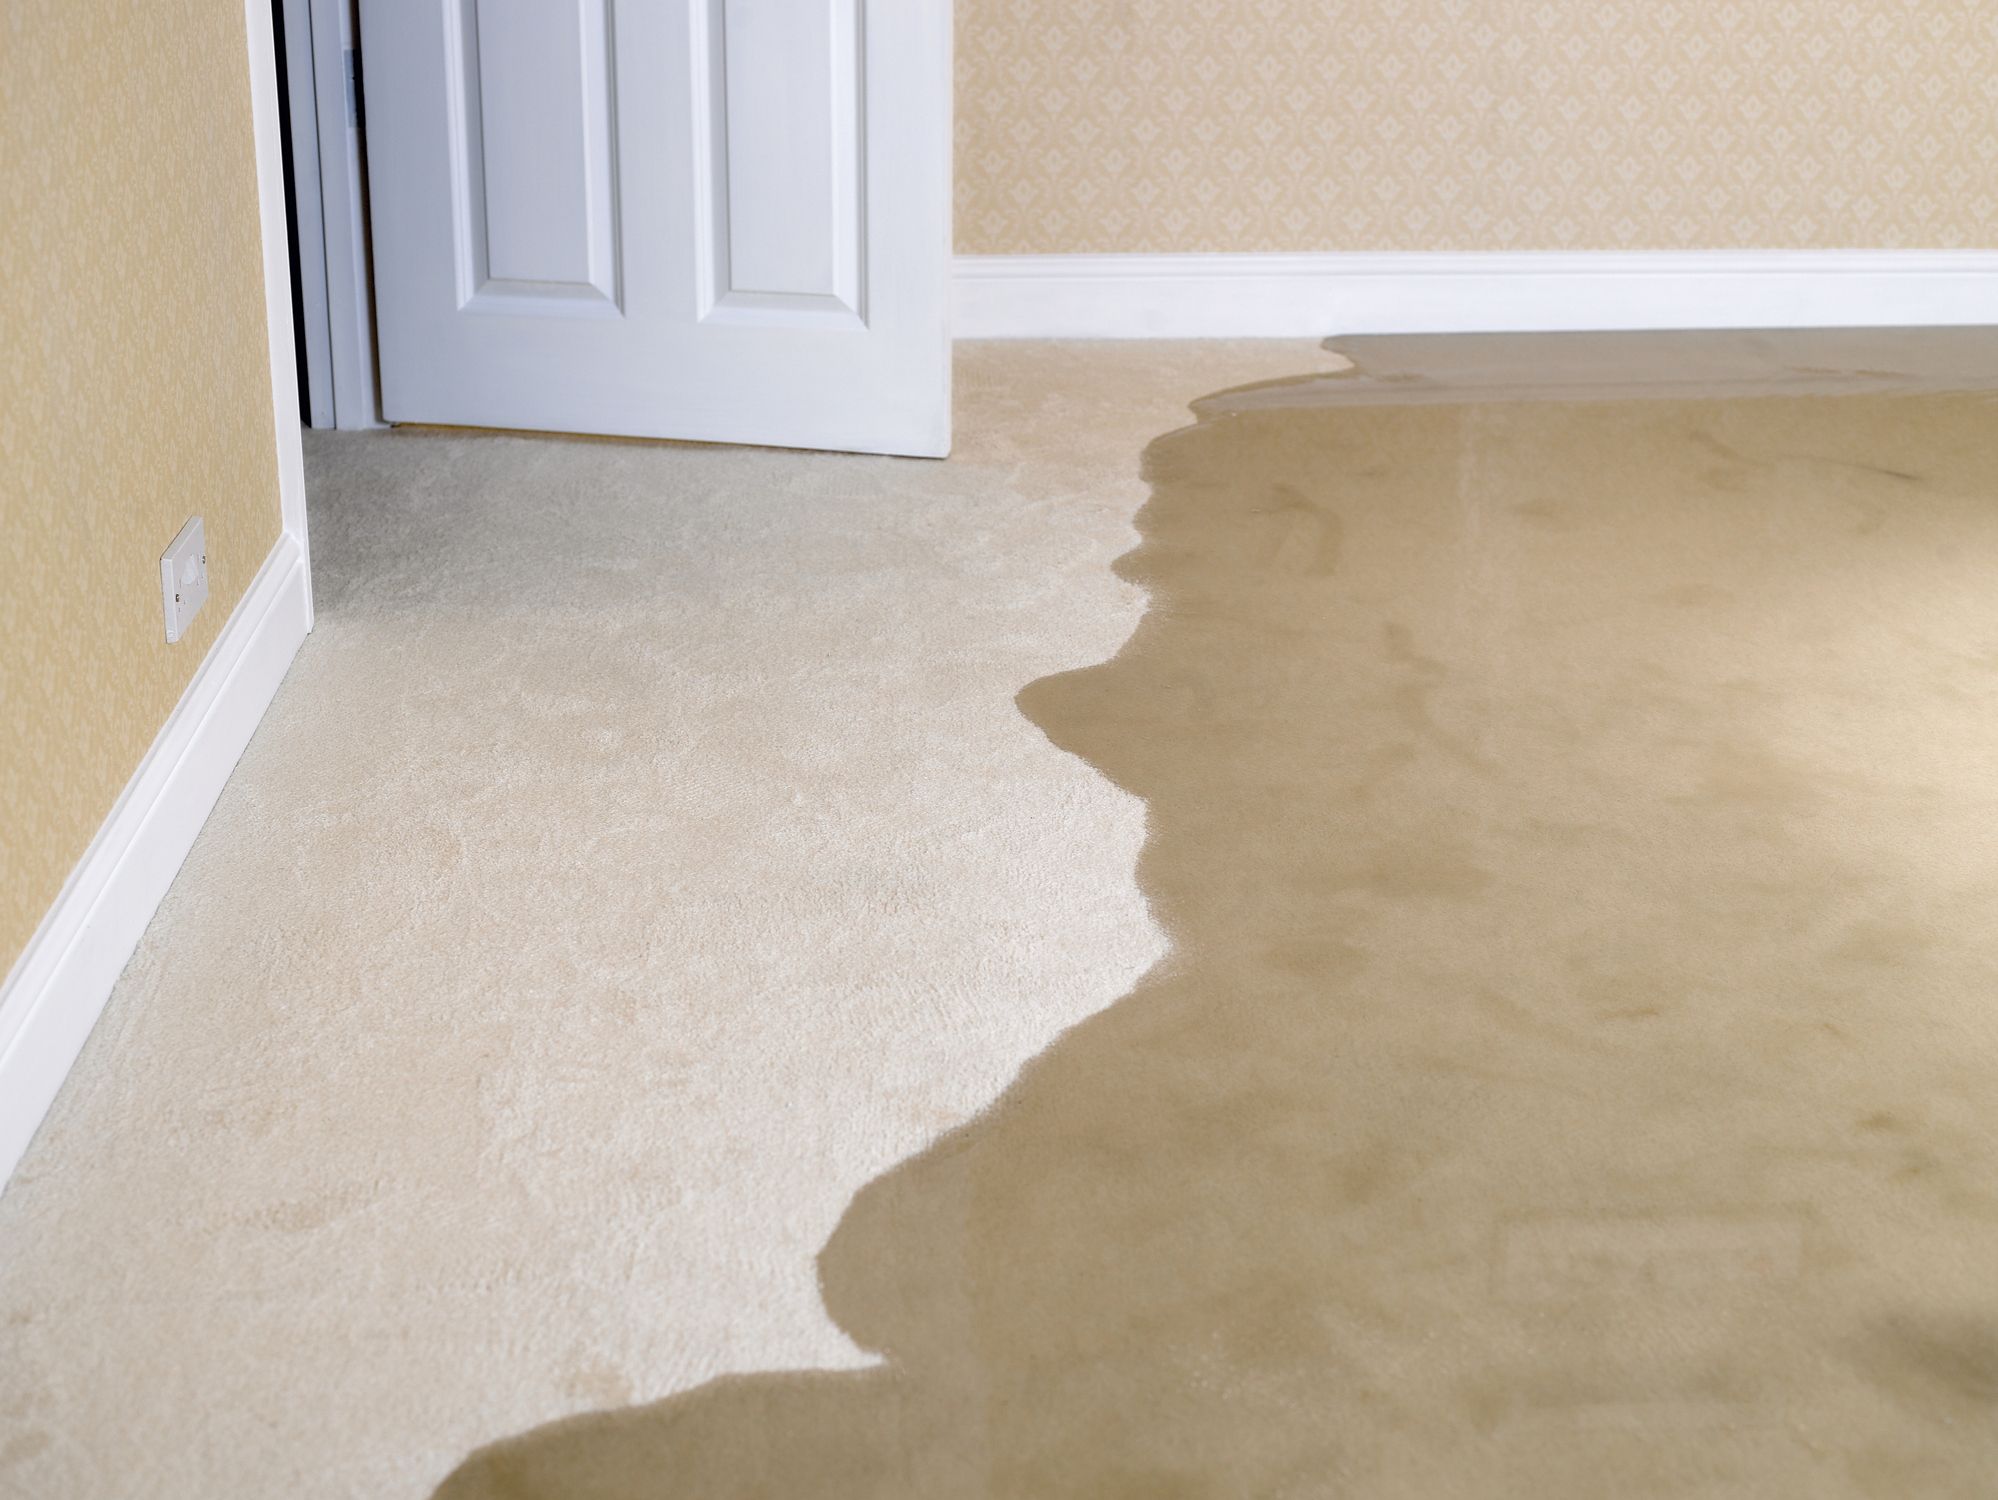 How To Dry Out Basement Carpet